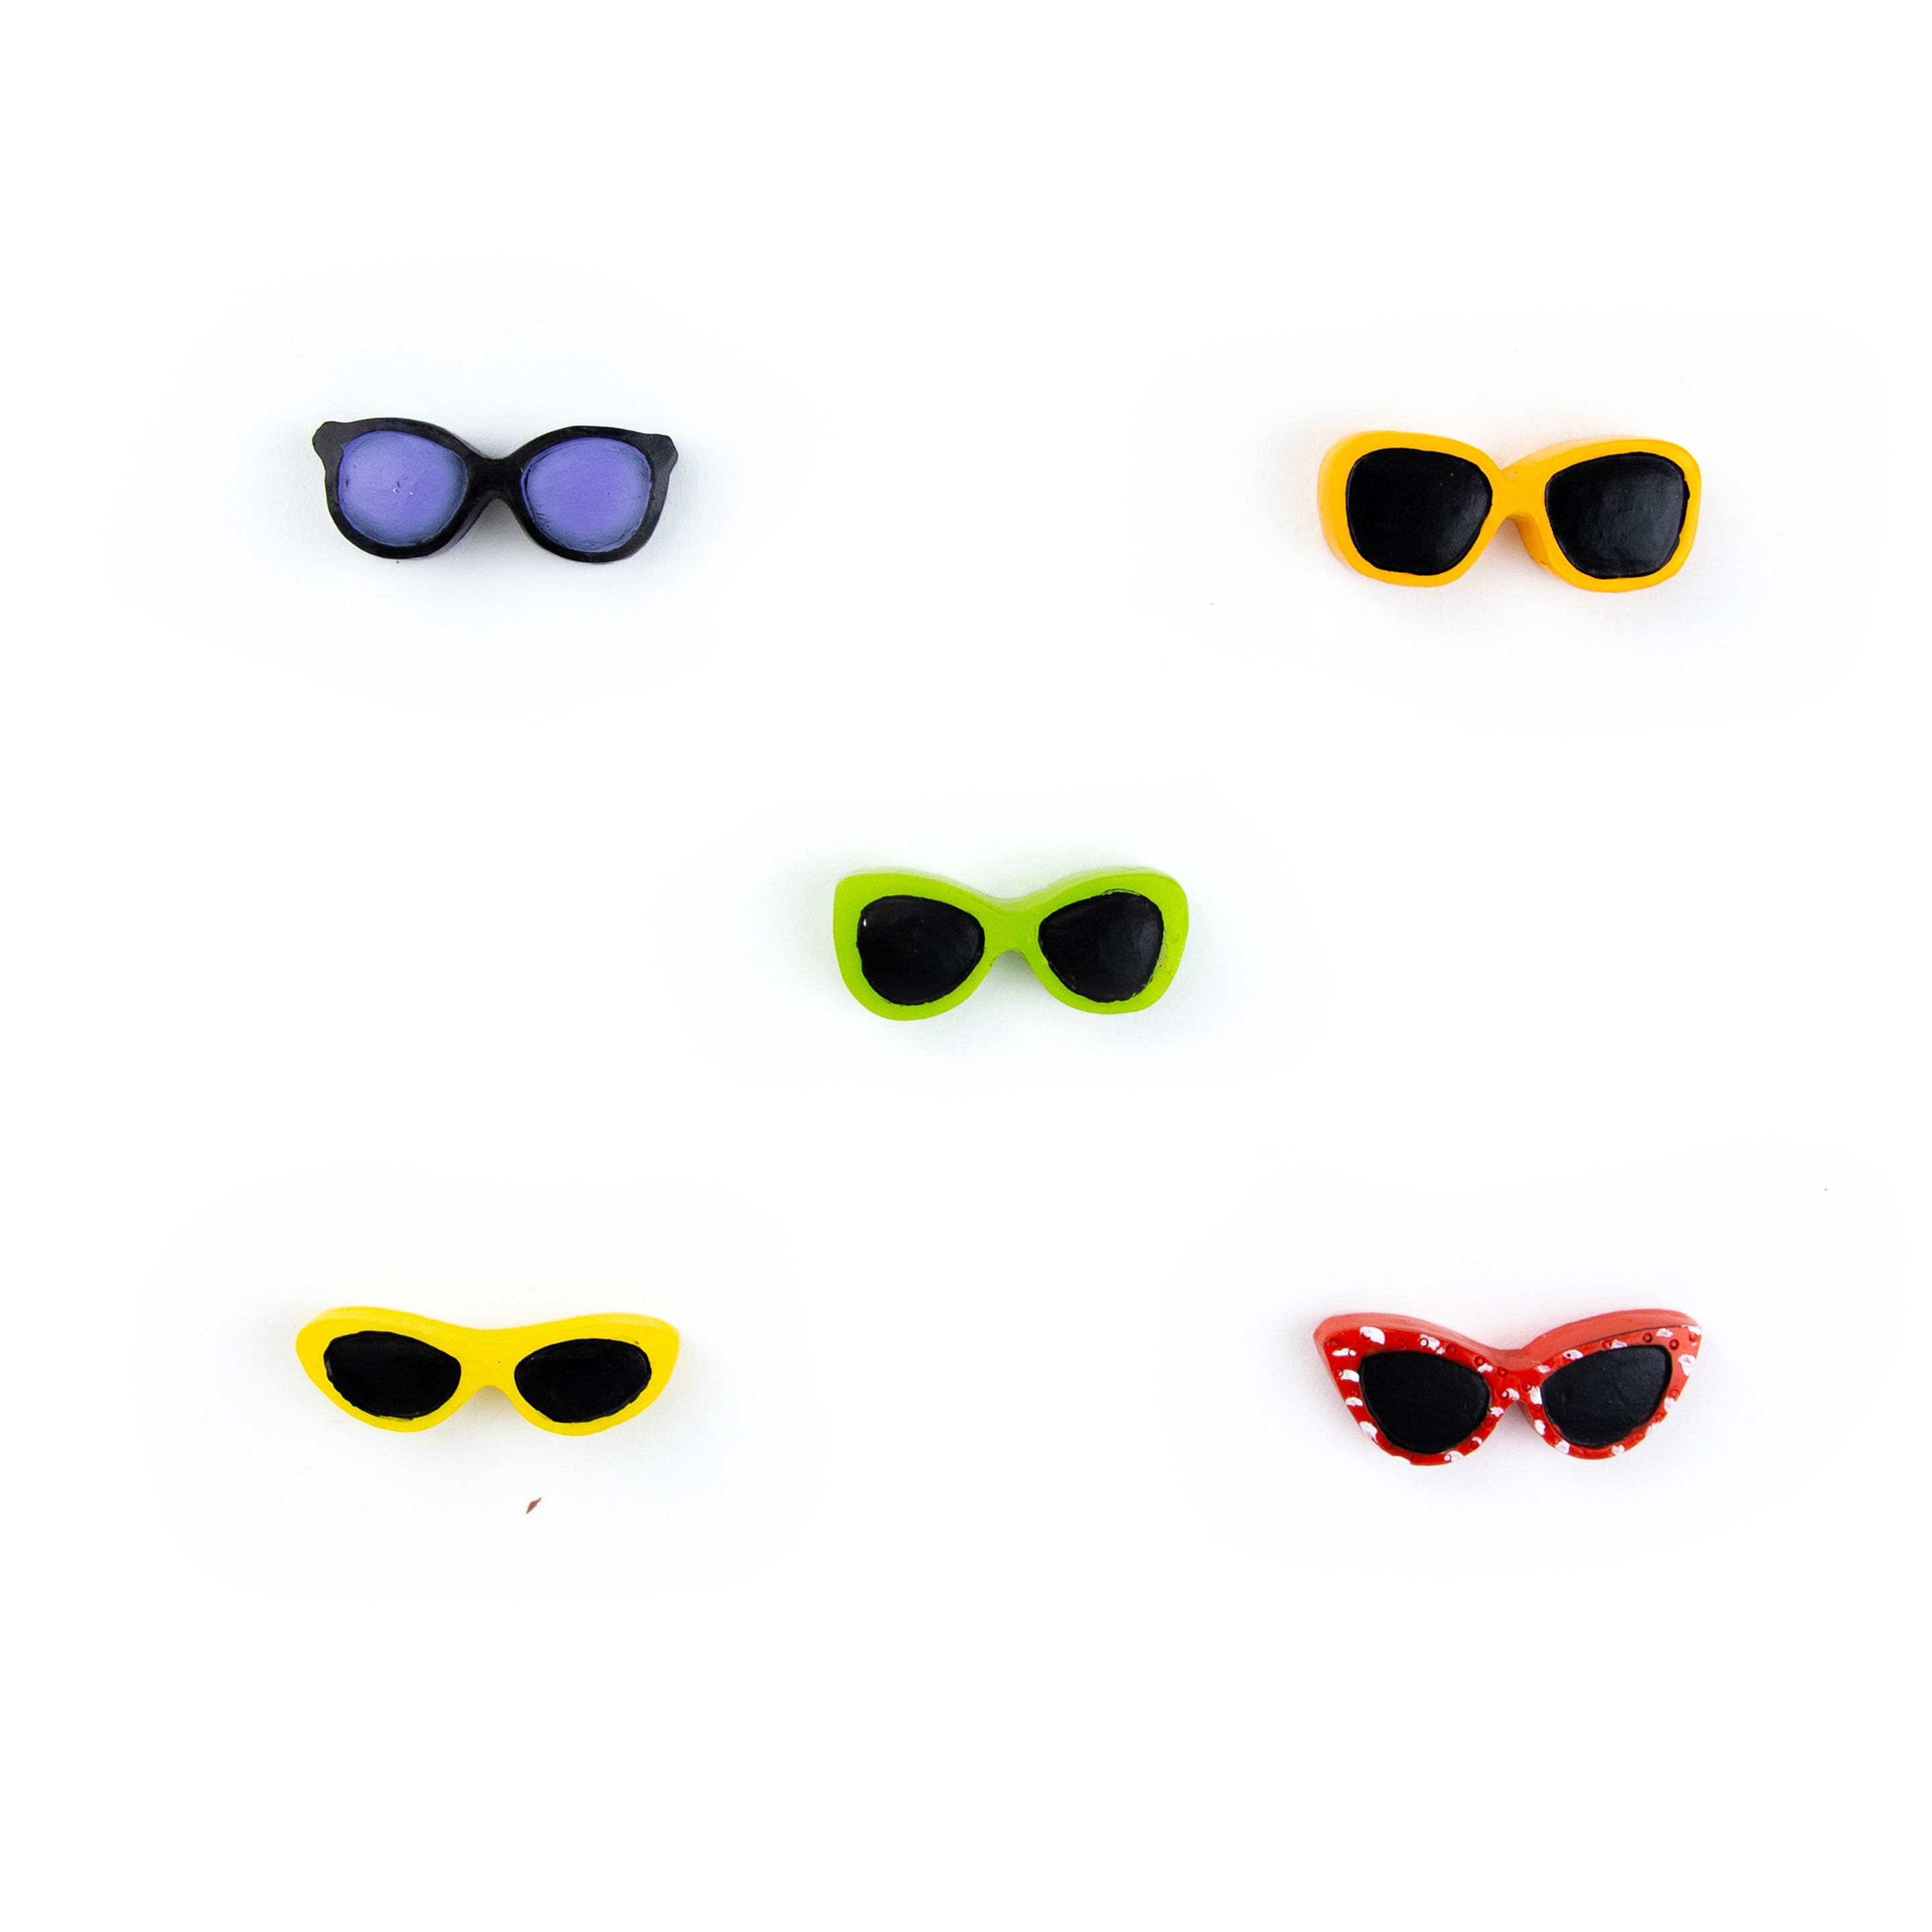 colorful SUNGLASSES magnets s/5